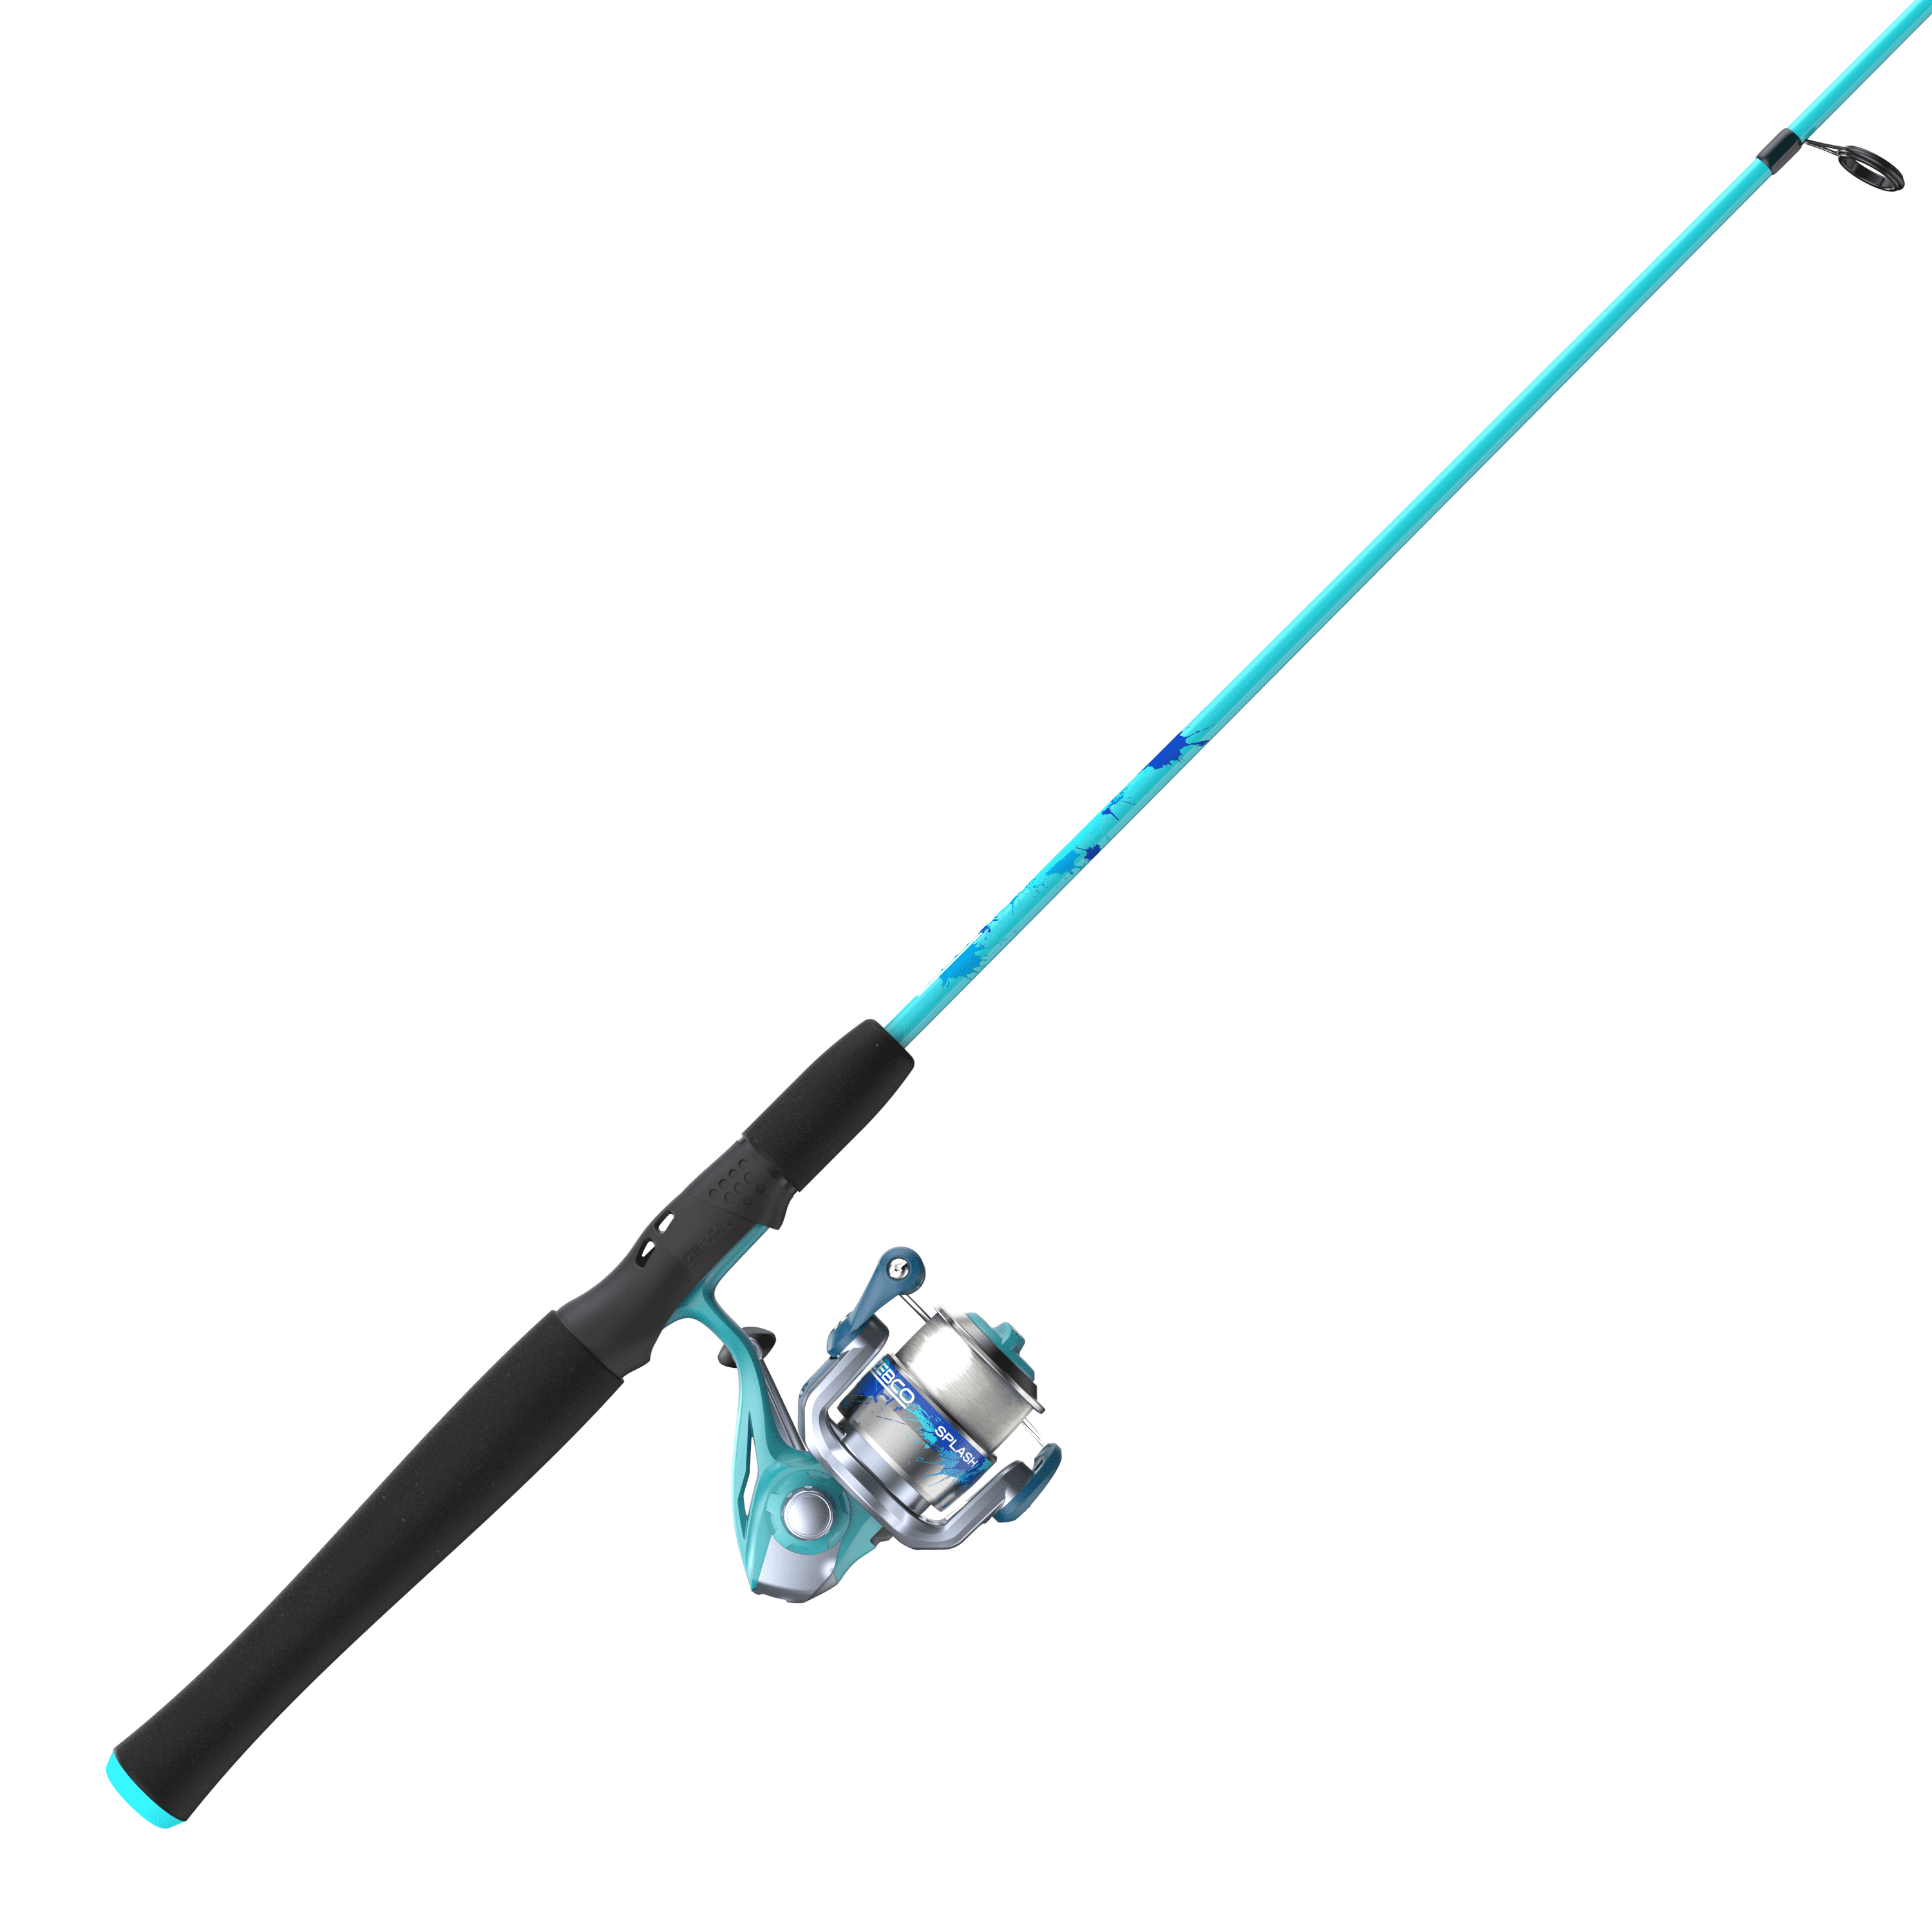 Float rod and reel combo